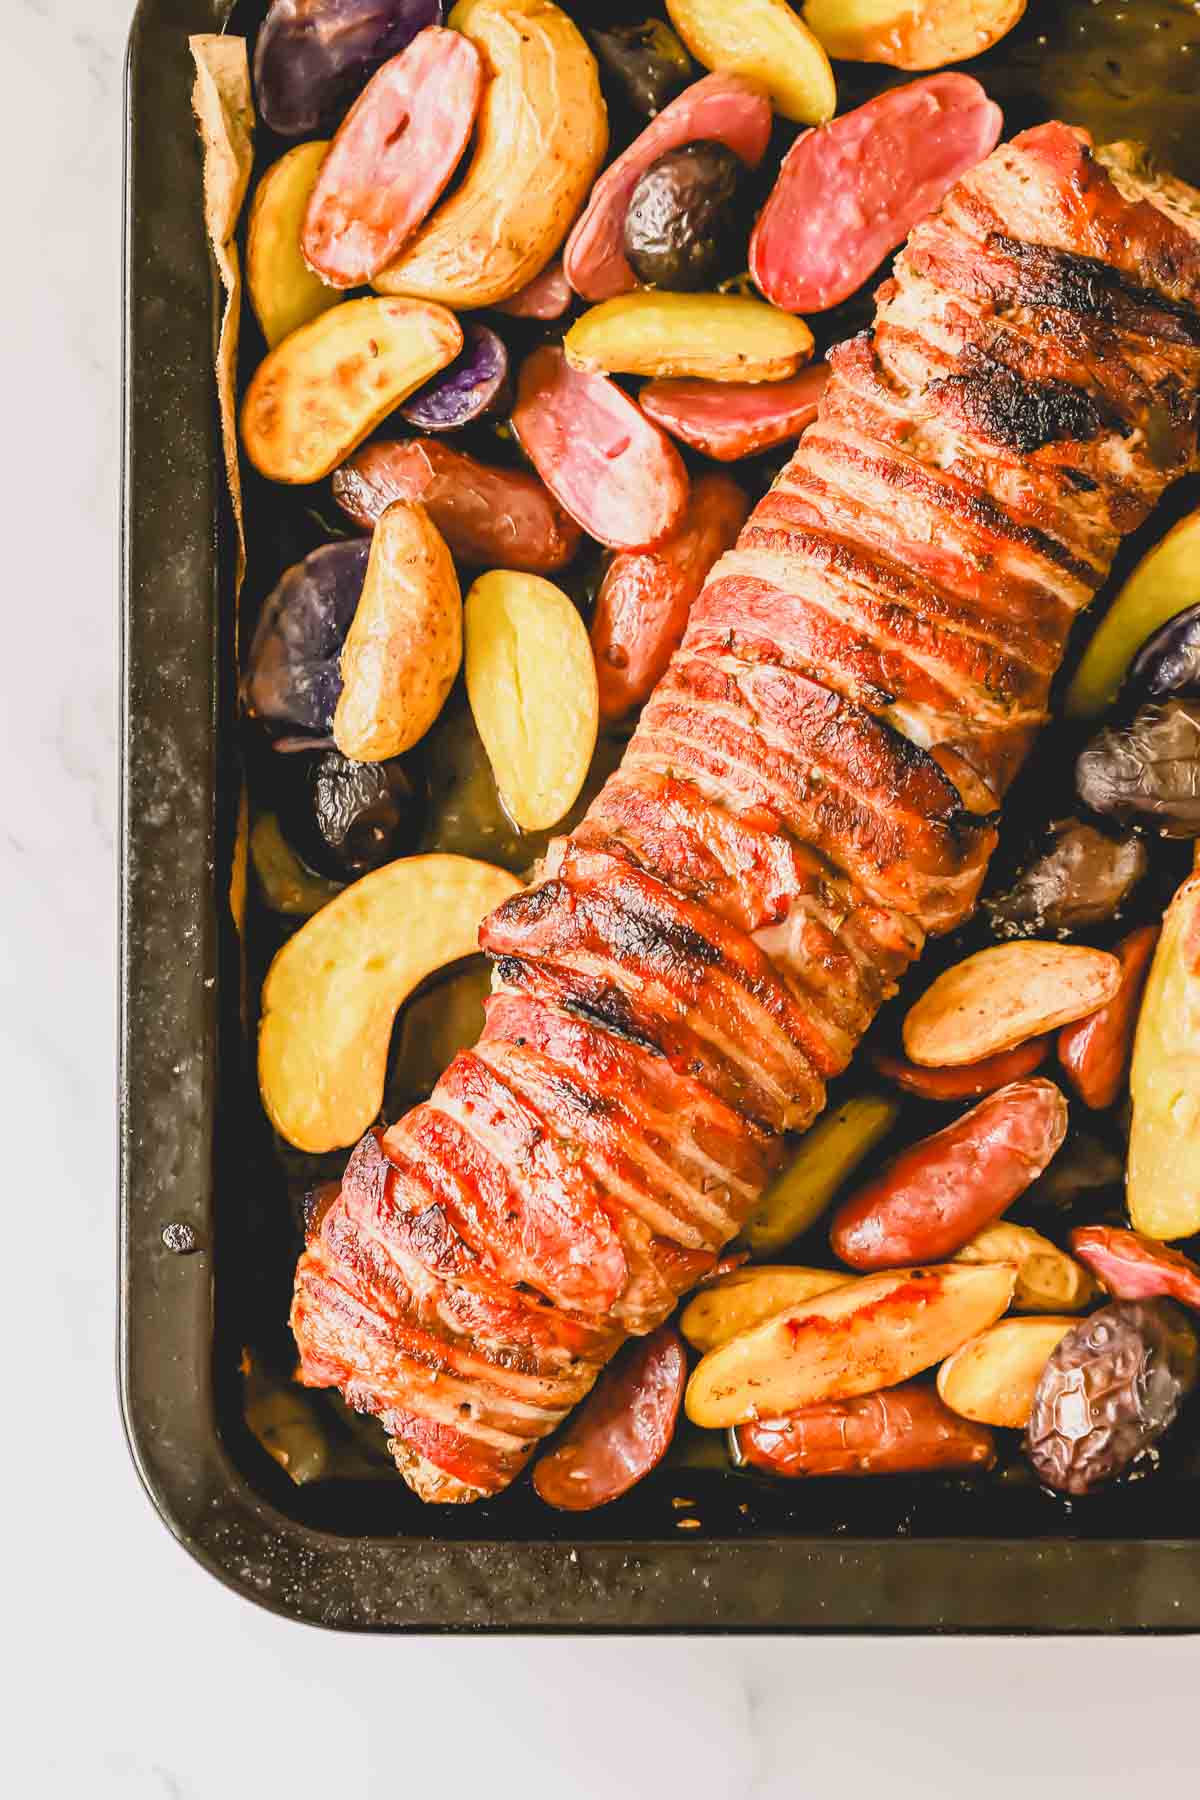 A baking tray with potatoes and a full bacon wrapped tenderloin.